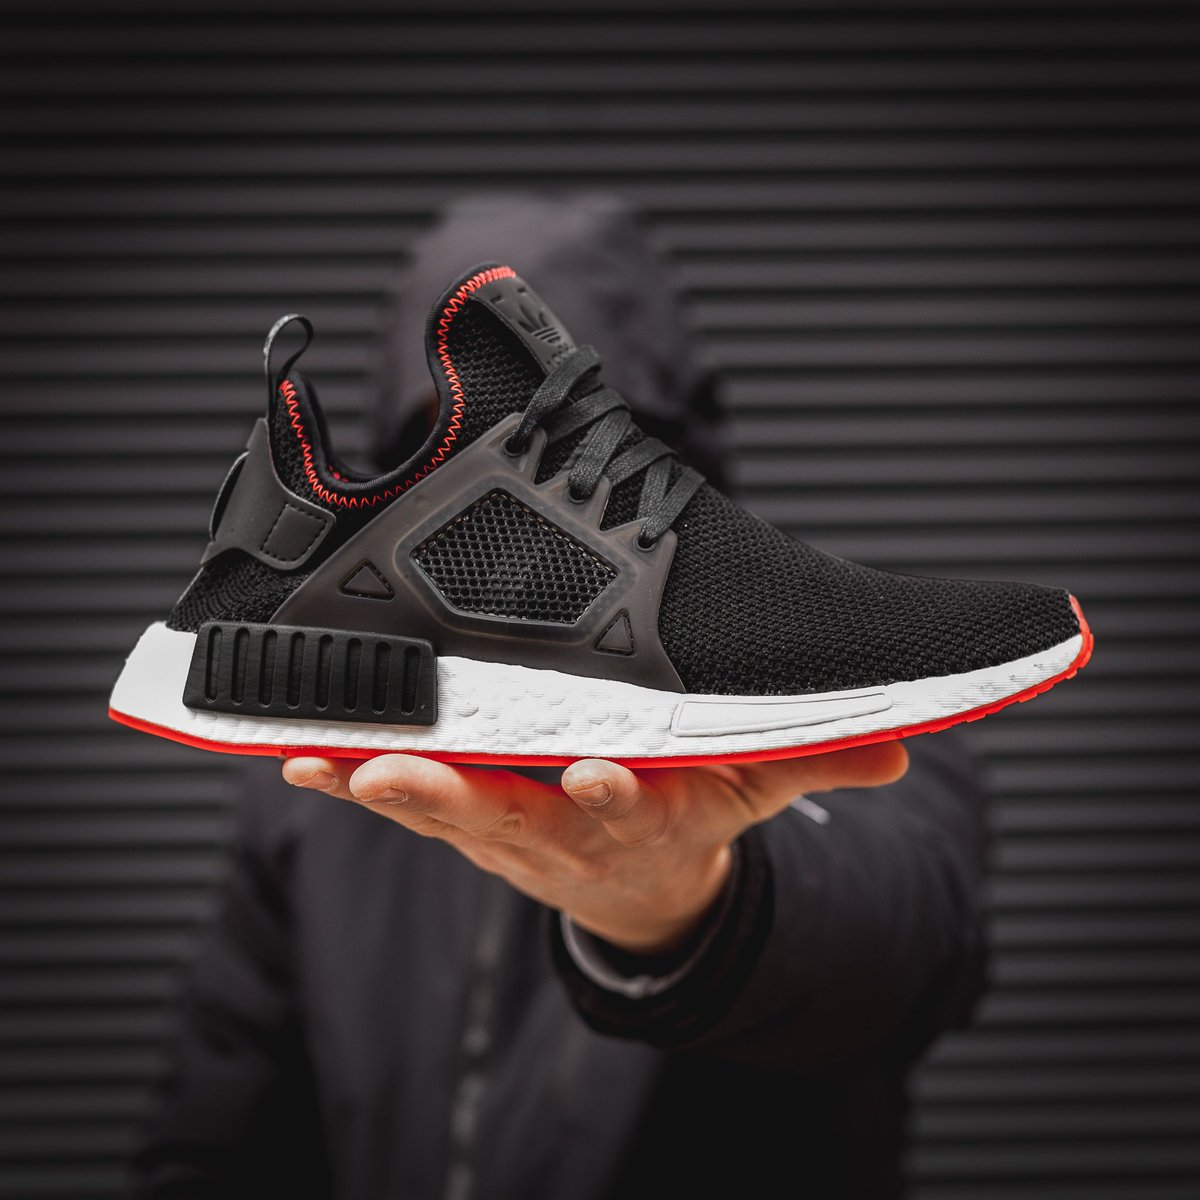 Adidas NMD XR1 Maroon Grailify Sneaker Releases Countr.